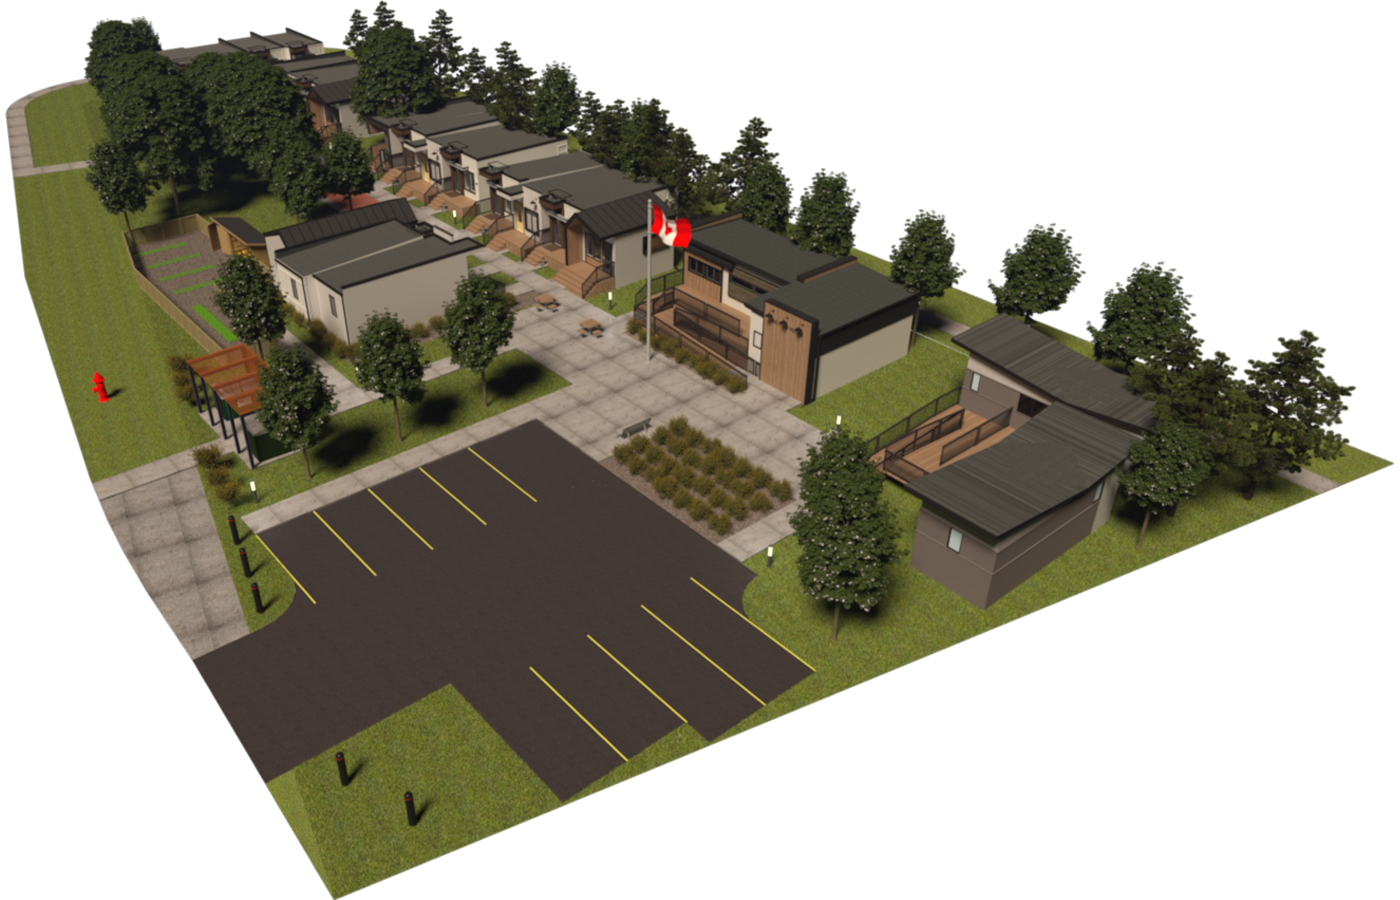 New village in the community of Homes for heroes in Edmonton, Alberta